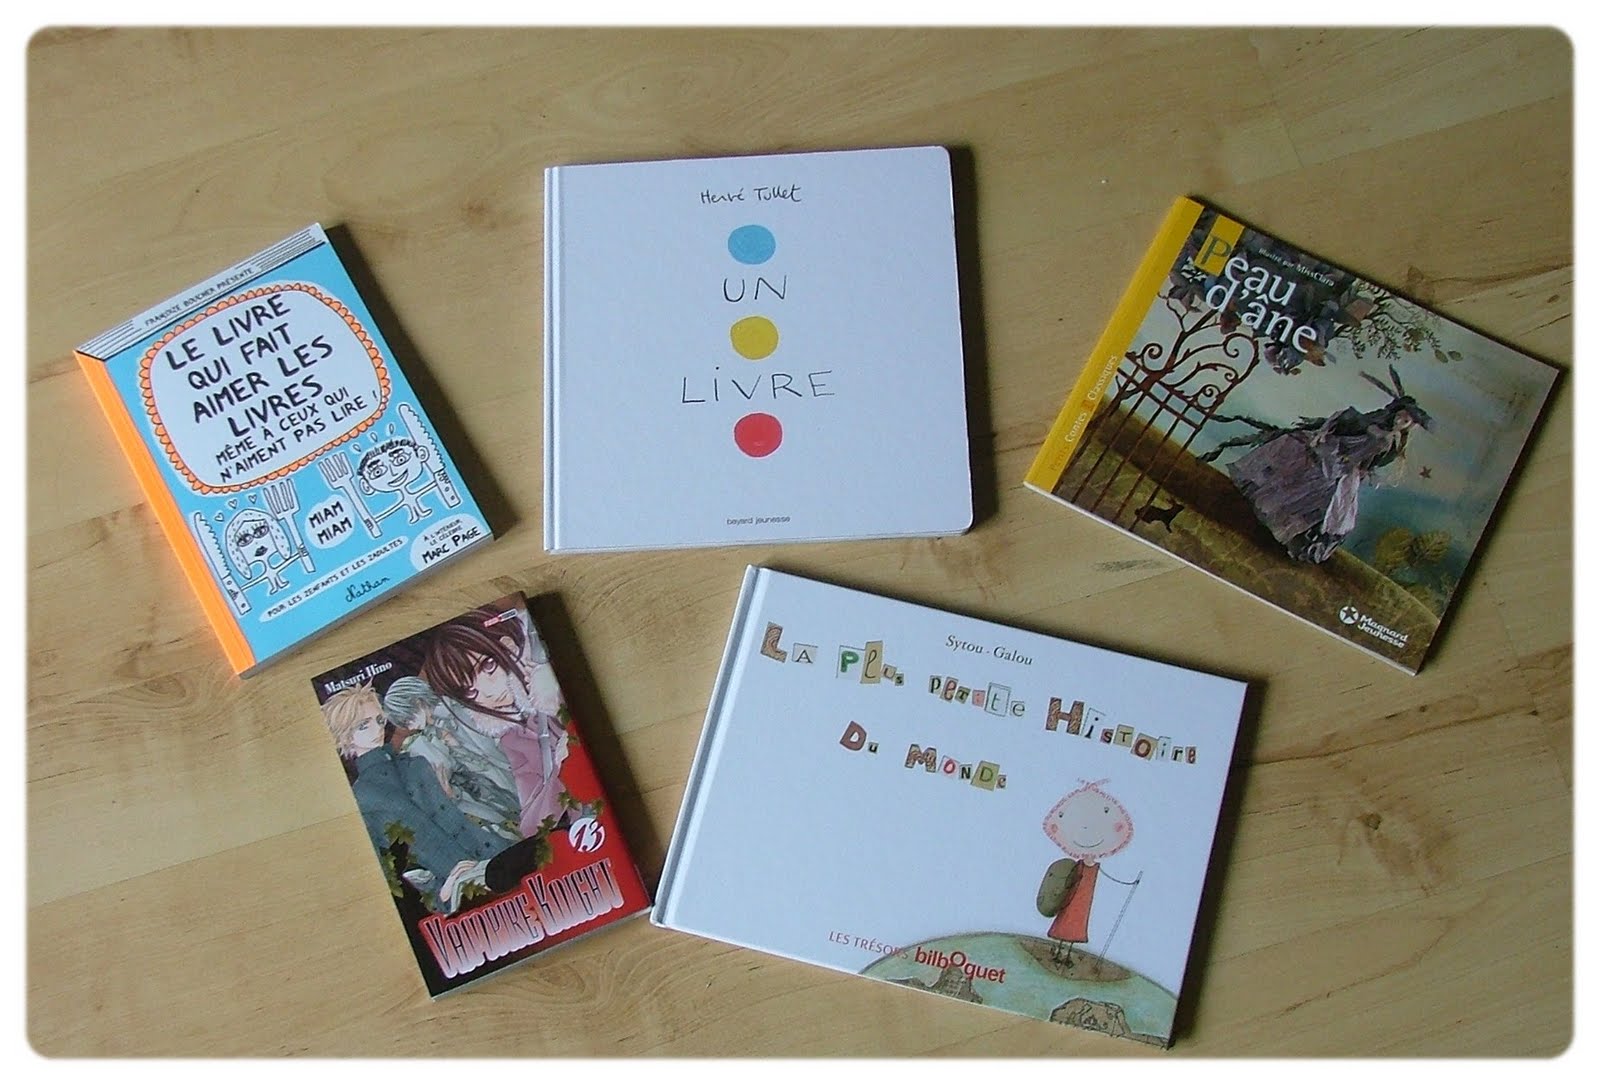 French loot … and musings on the Net Book Agreement – Library Mice